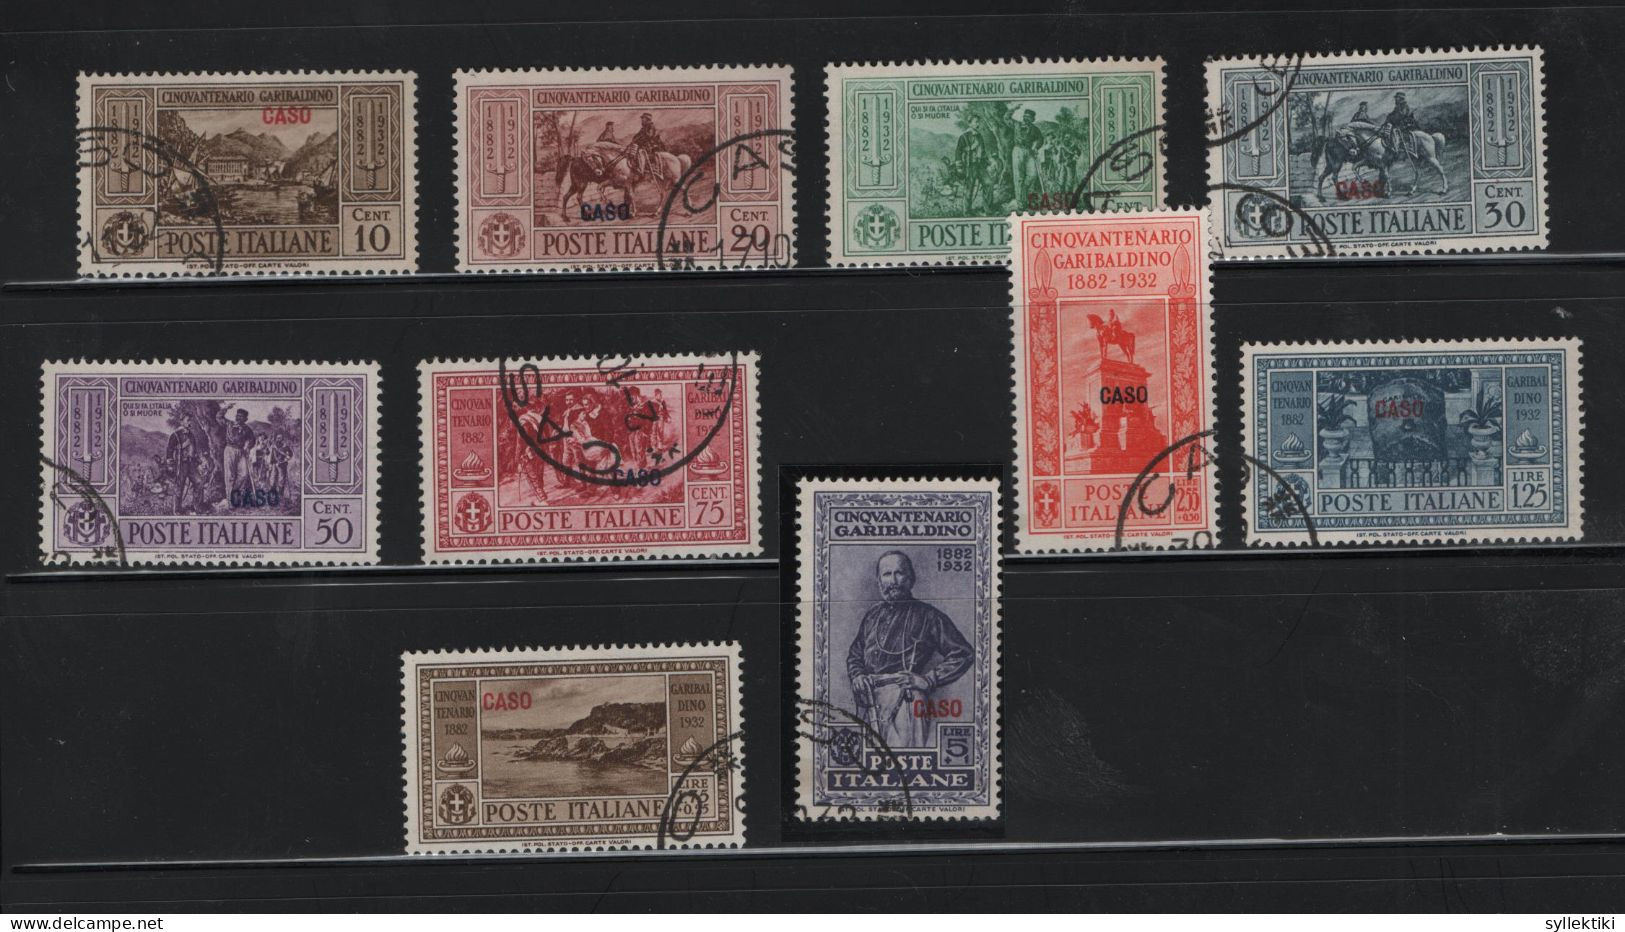 GREECE 1932 DODECANESE GARIBALDI ISSUE CASO OVERPRINT COMPLETE SET USED STAMPS   HELLAS No 108V - 117V AND VALUE EURO 30 - Dodekanisos